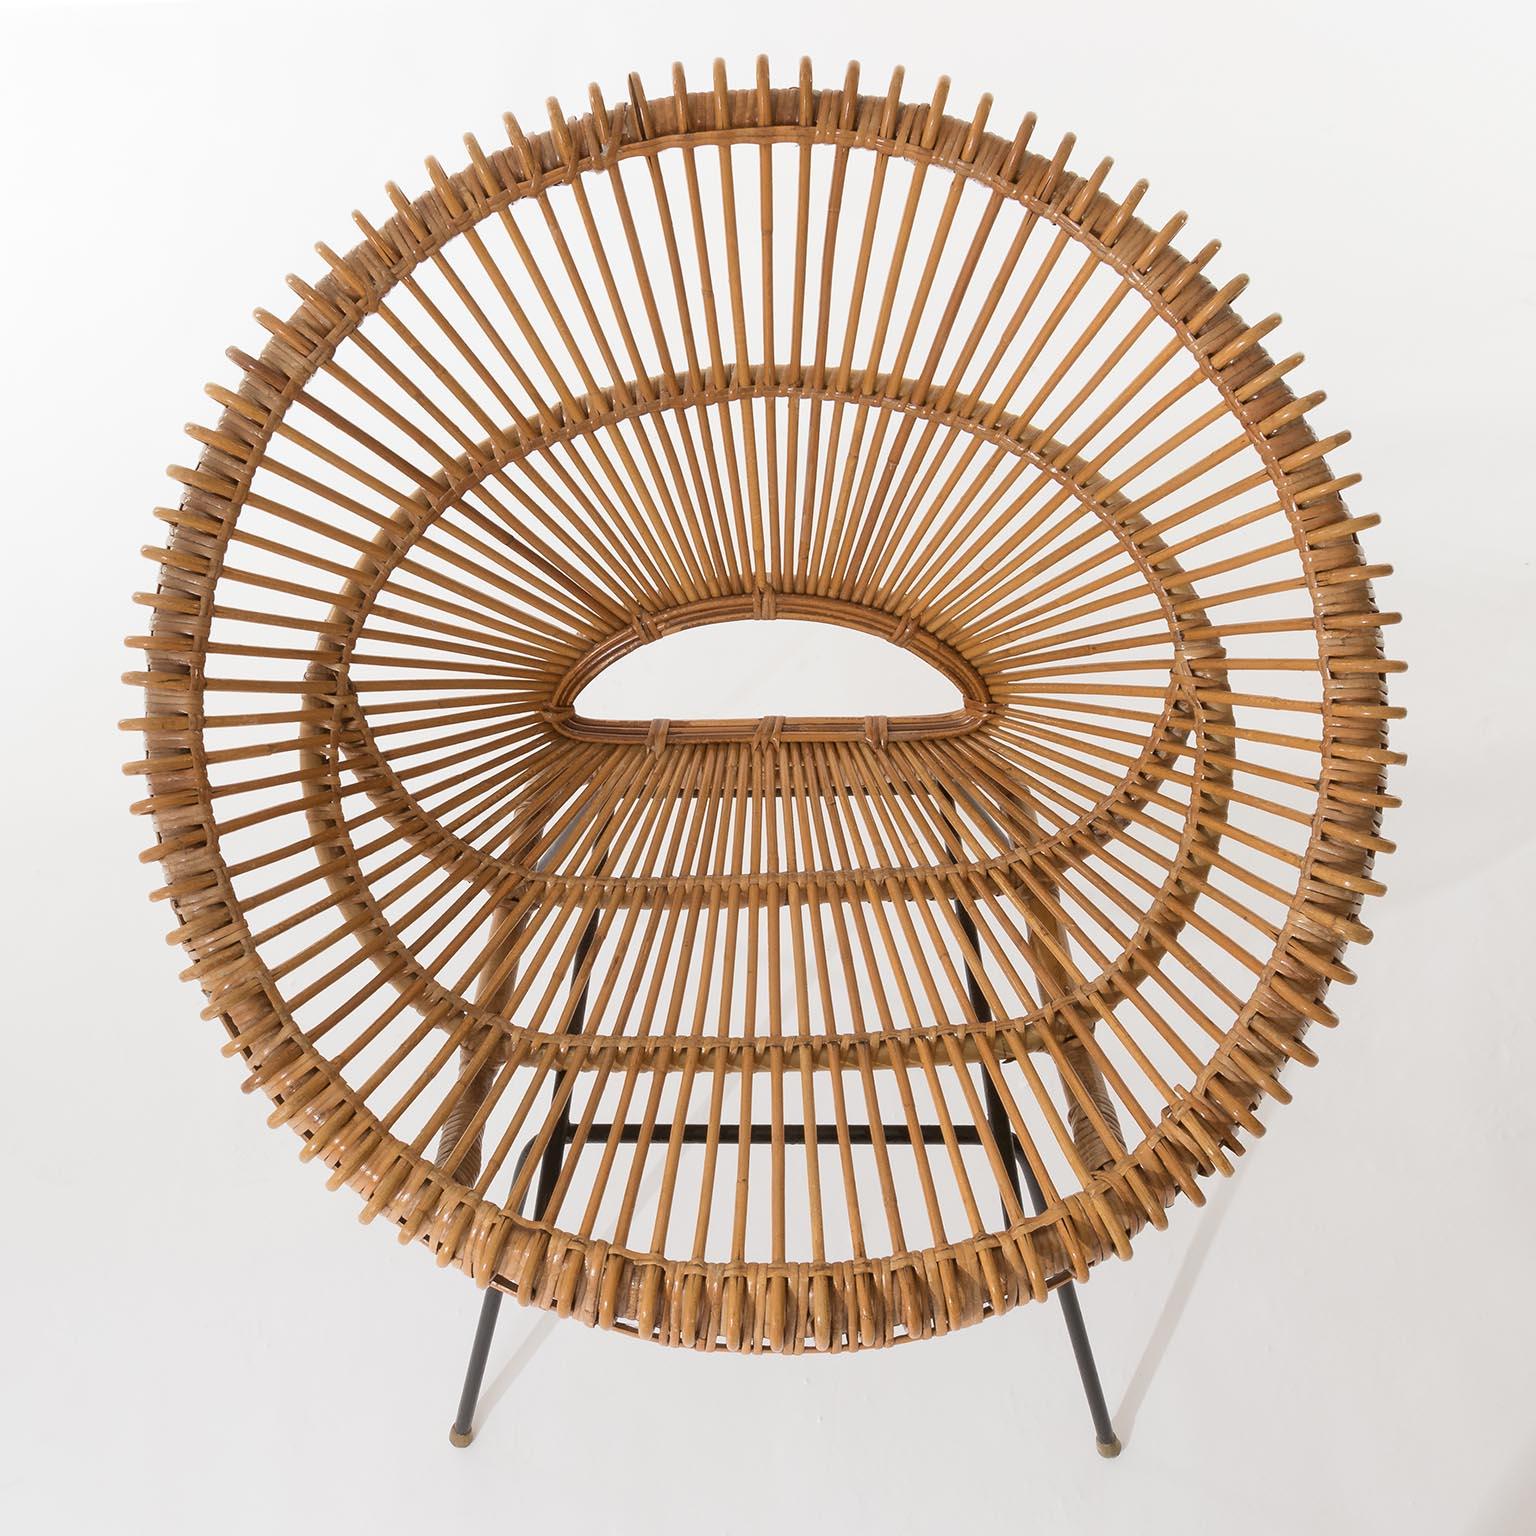 Pair of Mid-Century Modern Rattan Bamboo Chairs, Janine Abraham, Dirk Rol, 1960s For Sale 5